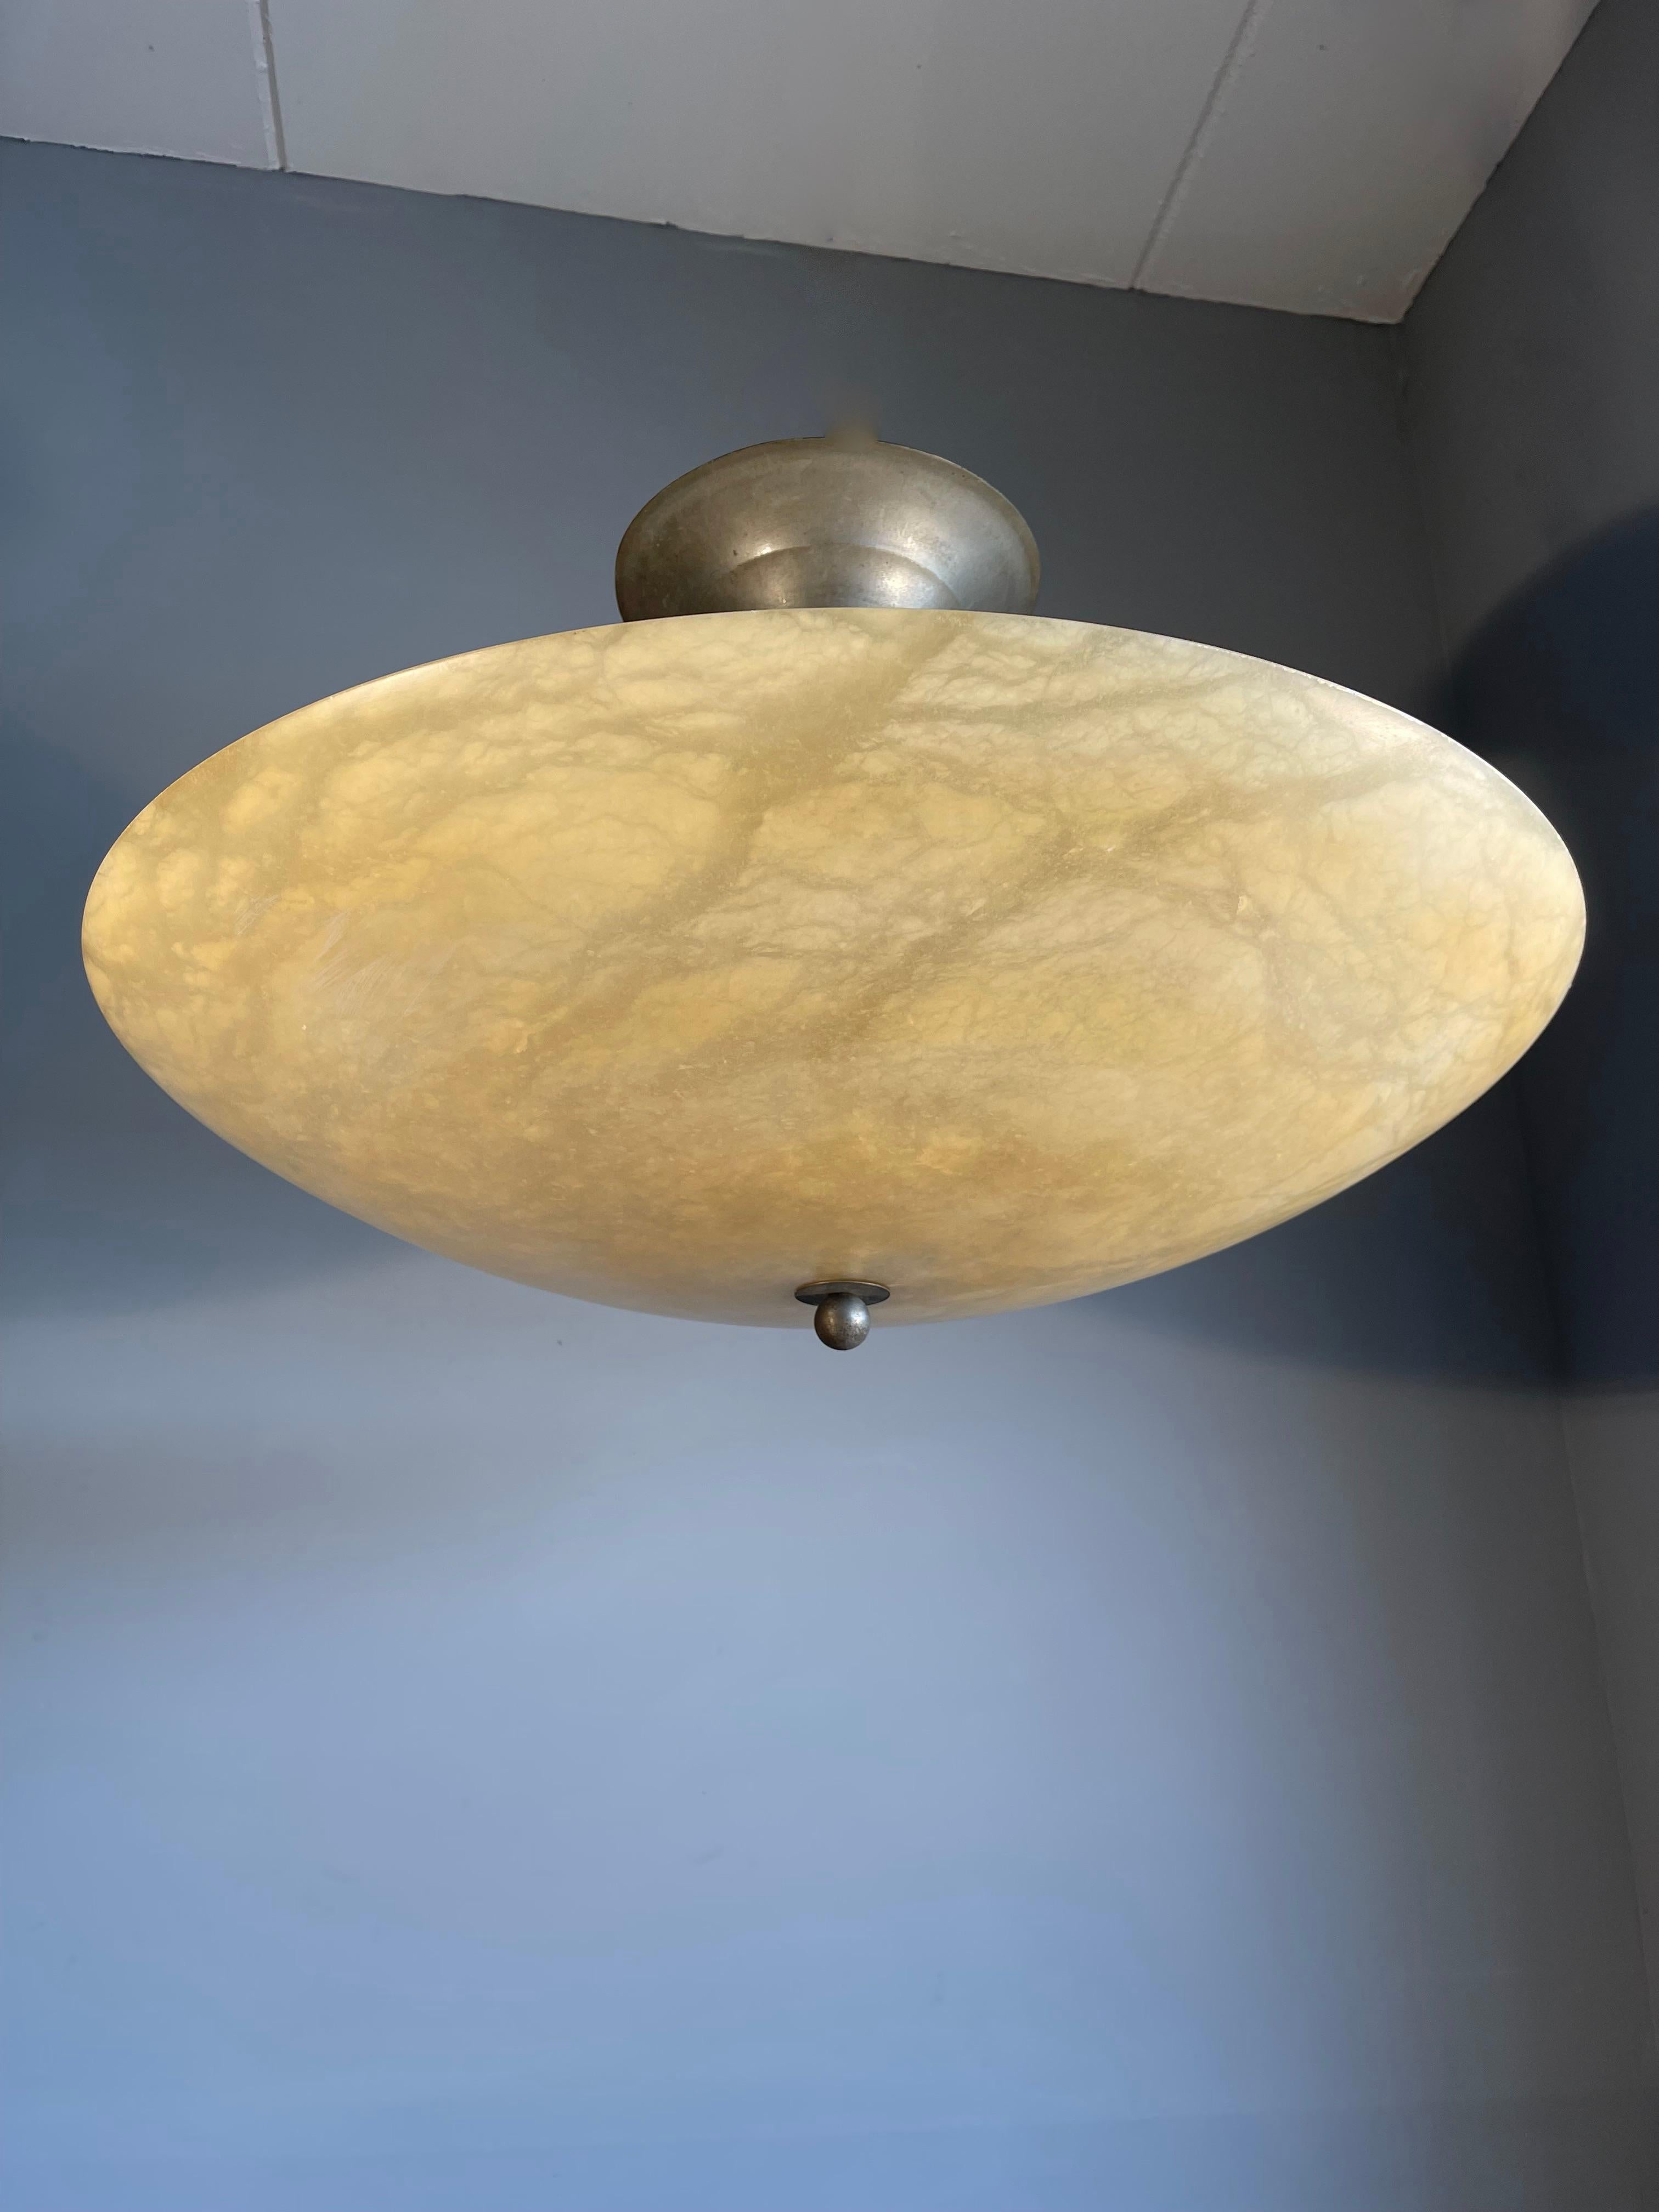 Hand-Crafted Largest in Size Alabaster Art Deco Style Midcentury Pendant Light / Flush Mount